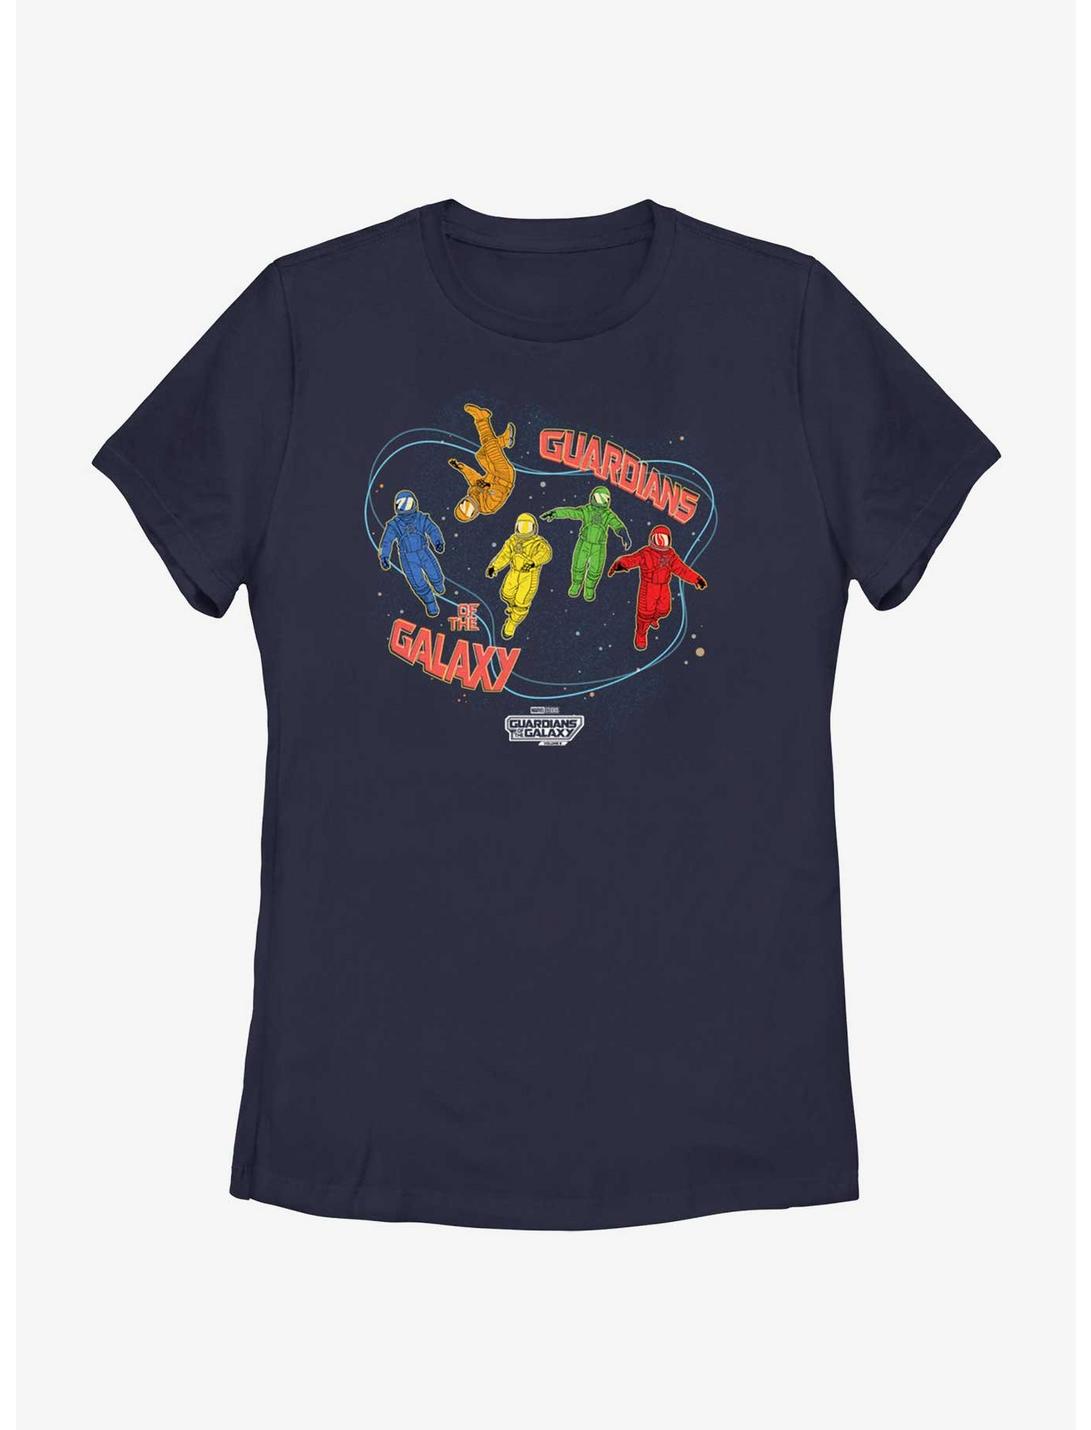 Guardians Of The Galaxy Vol. 3 Astronauts In Space Womens T-Shirt, NAVY, hi-res